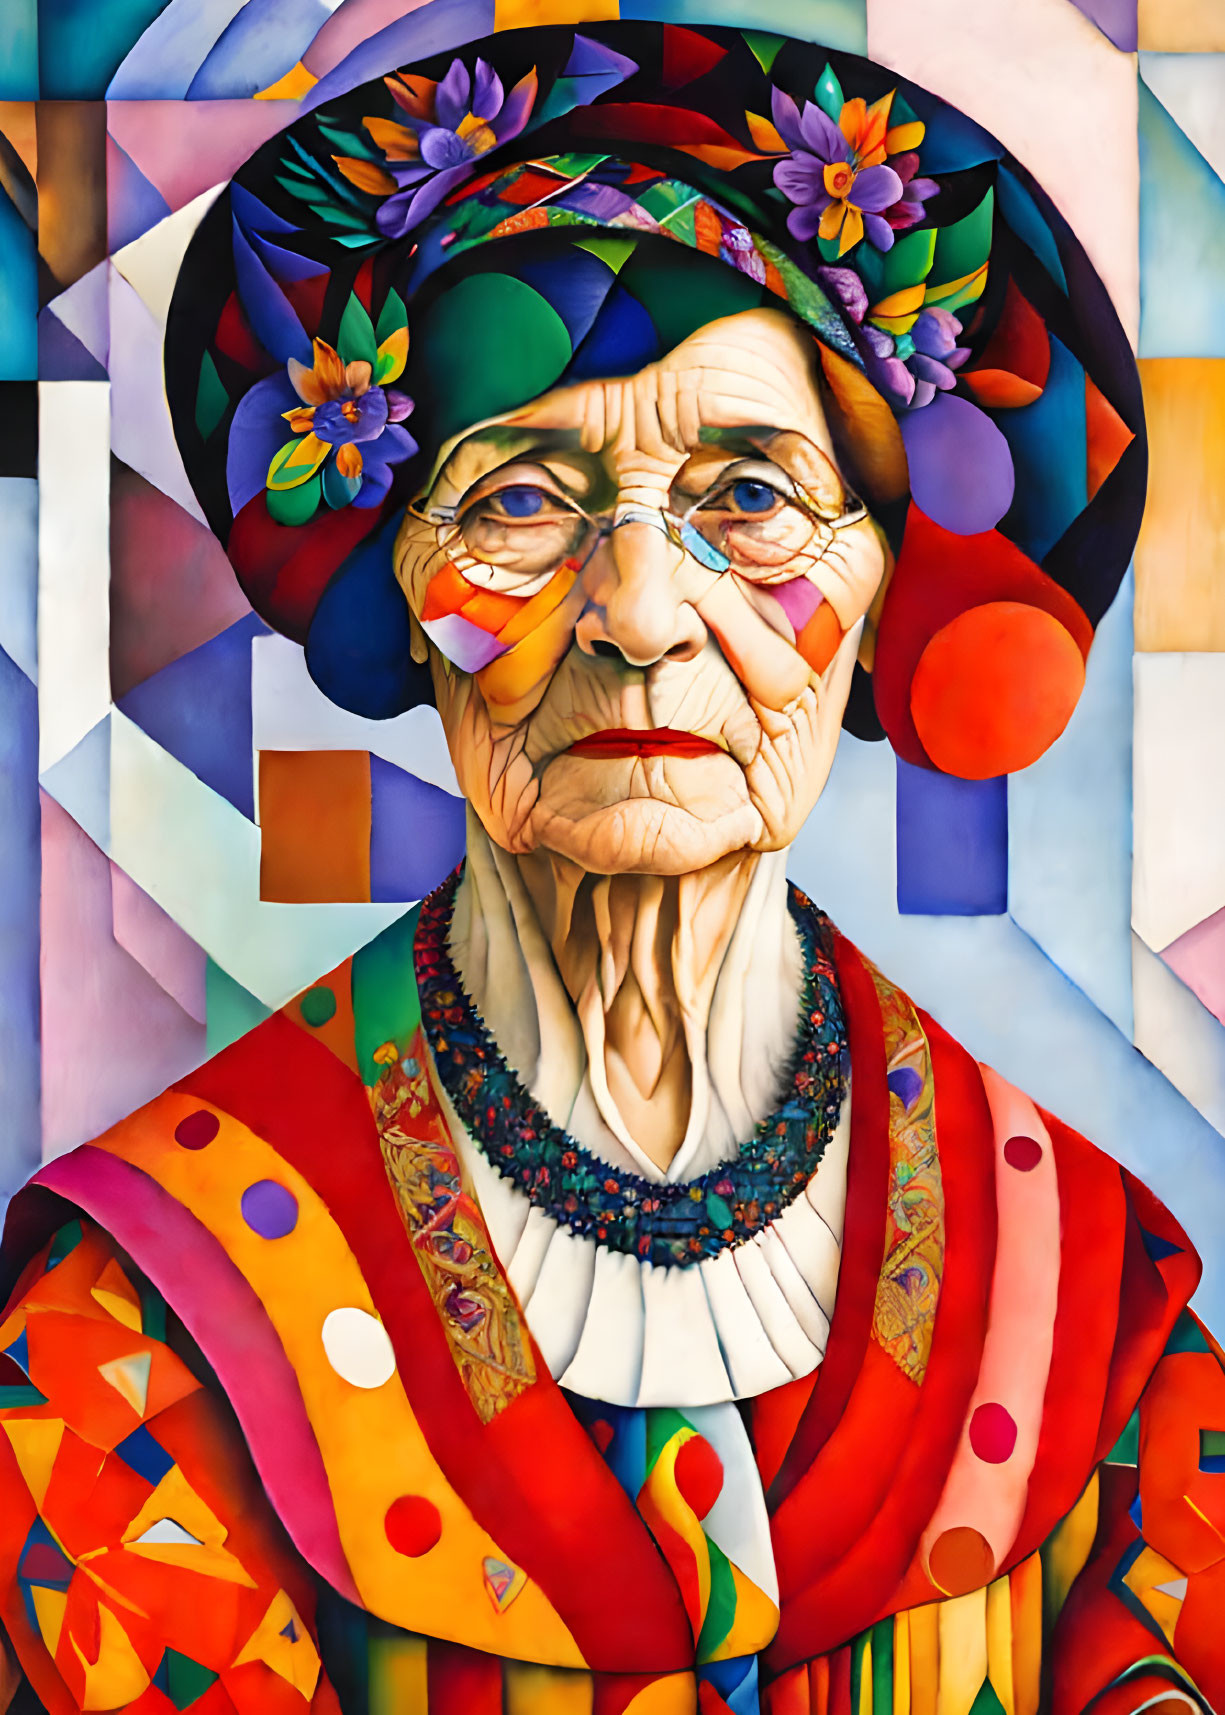 Colorful geometric portrait of elderly woman with glasses, patterned hat, flowers, vibrant scarf, and